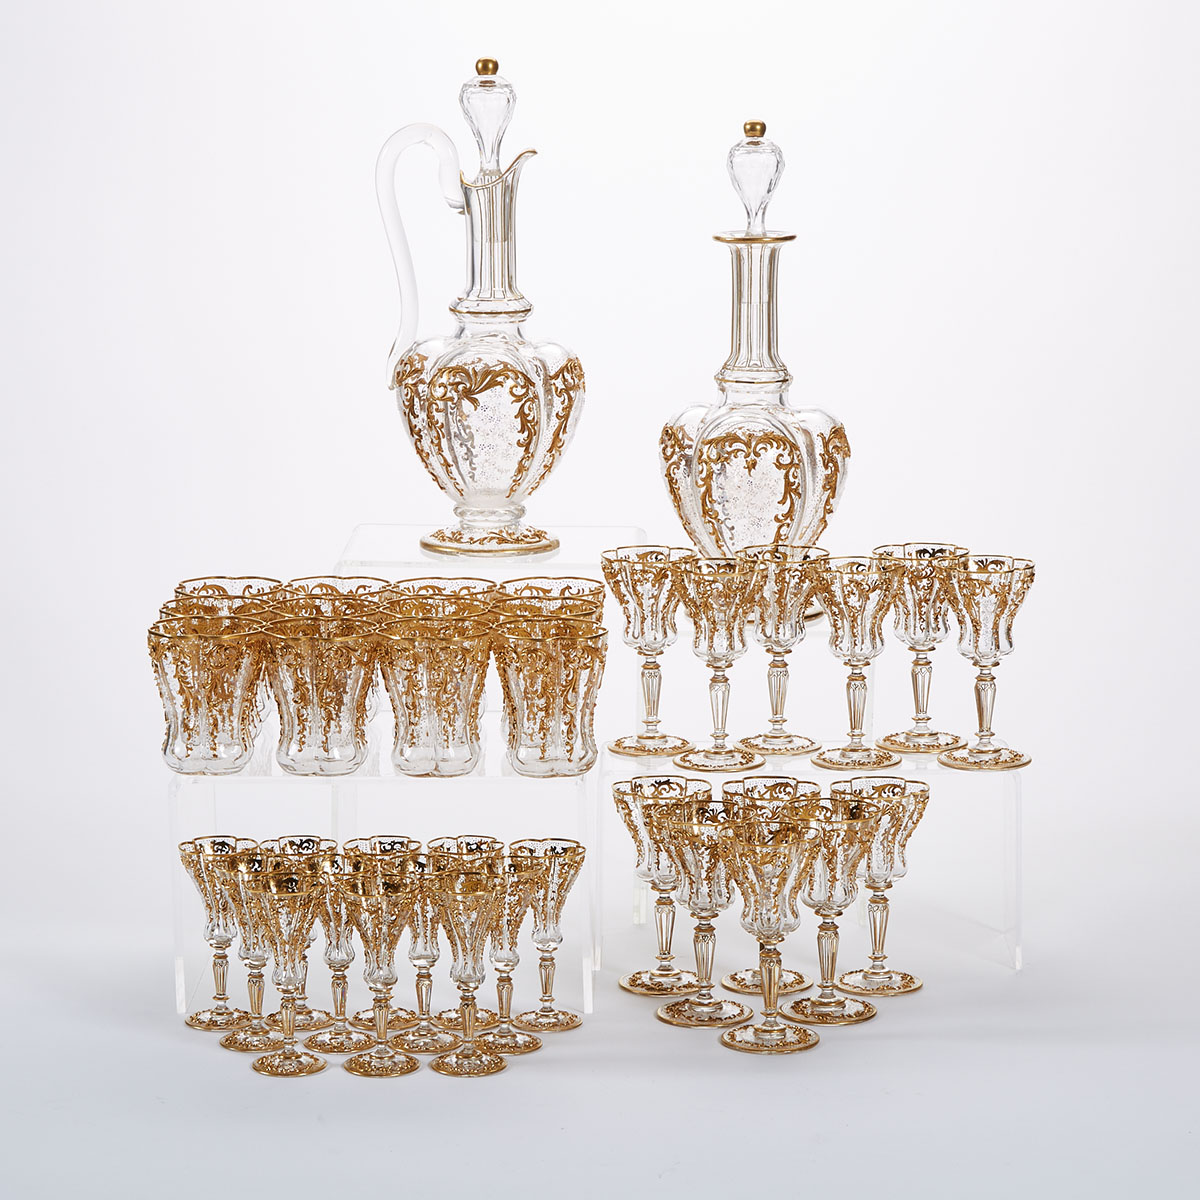 Venetian Enamelled and Gilt Glass Stemware Service, early 20th century